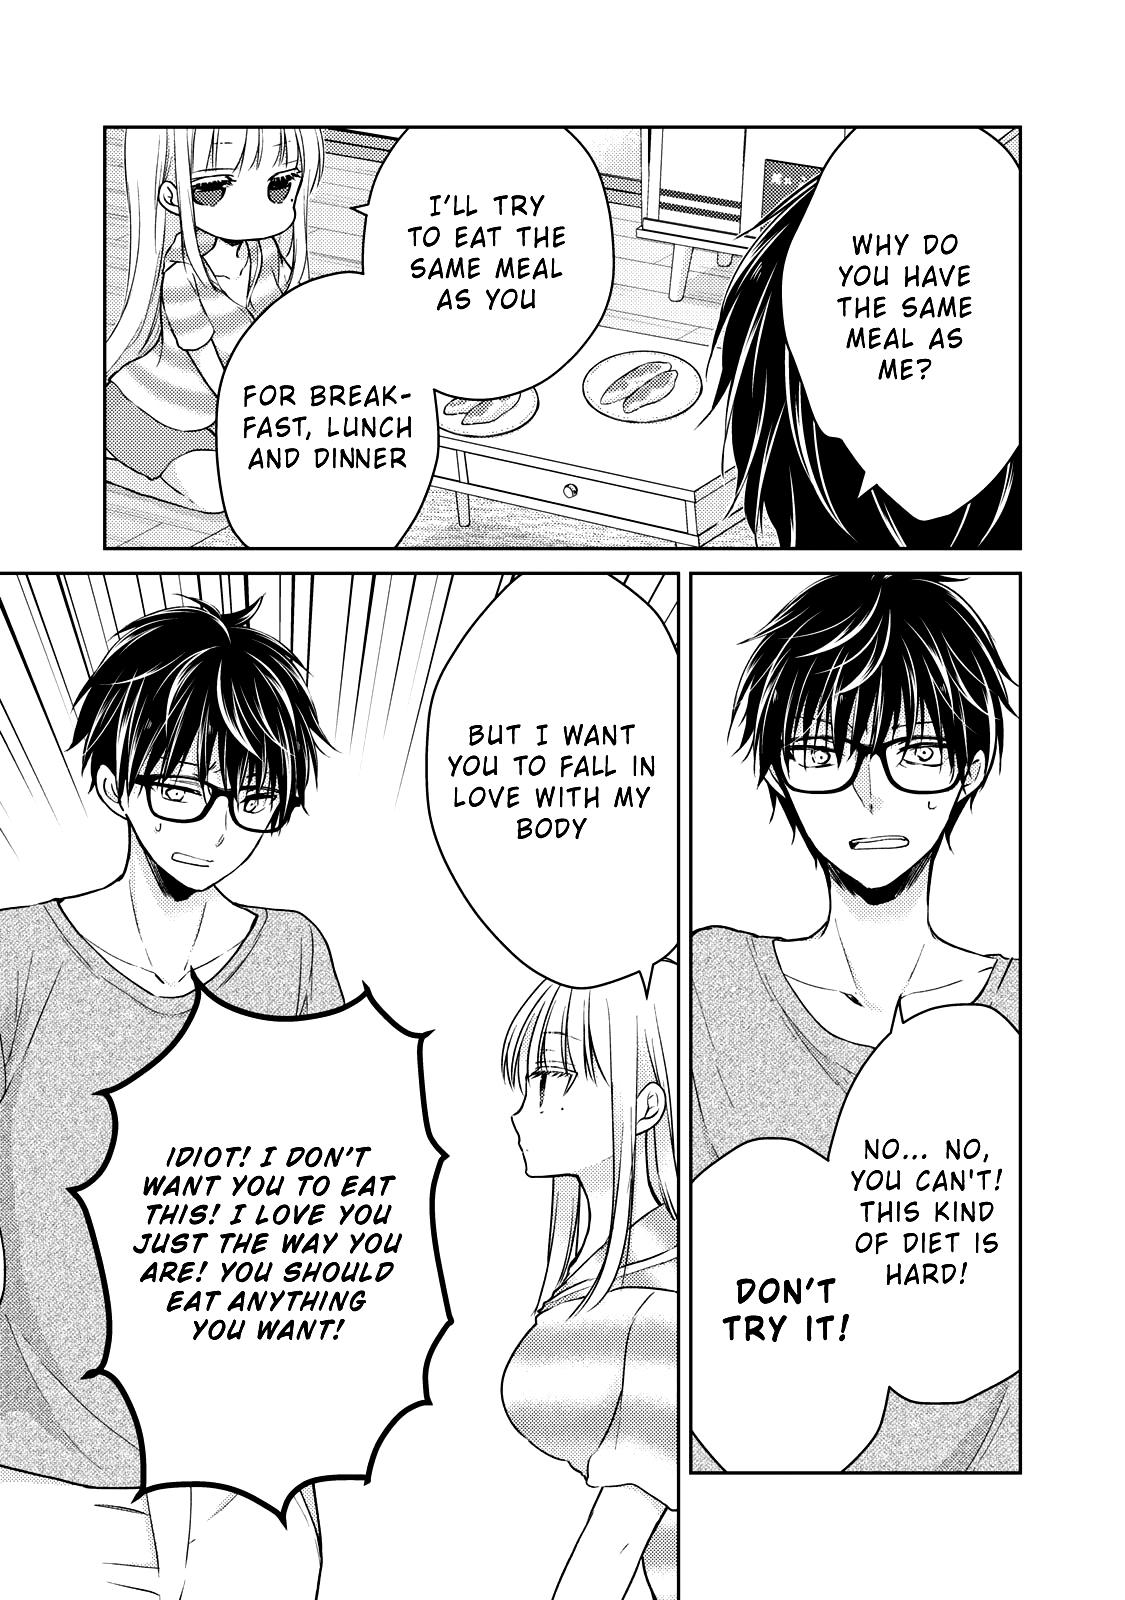 We May Be An Inexperienced Couple But... Vol. 5 Ch. 35 Charming Body